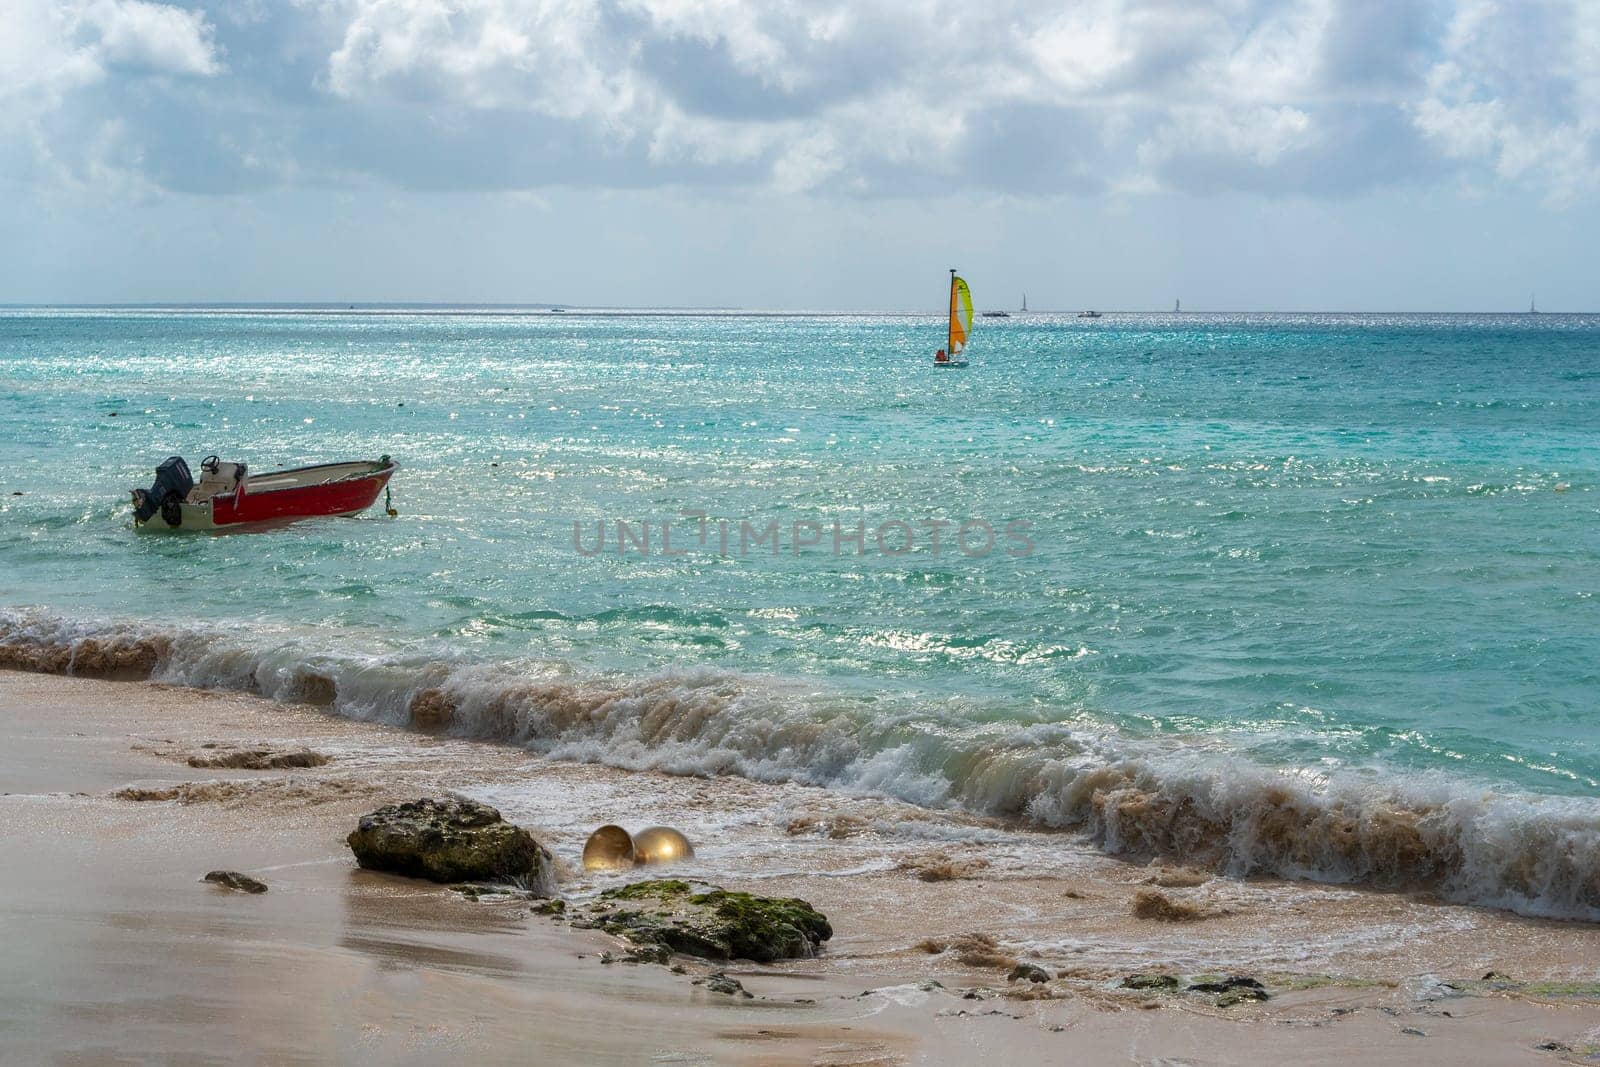 Boat with a sail in the warm waters of the Atlantic Ocean copy by ben44